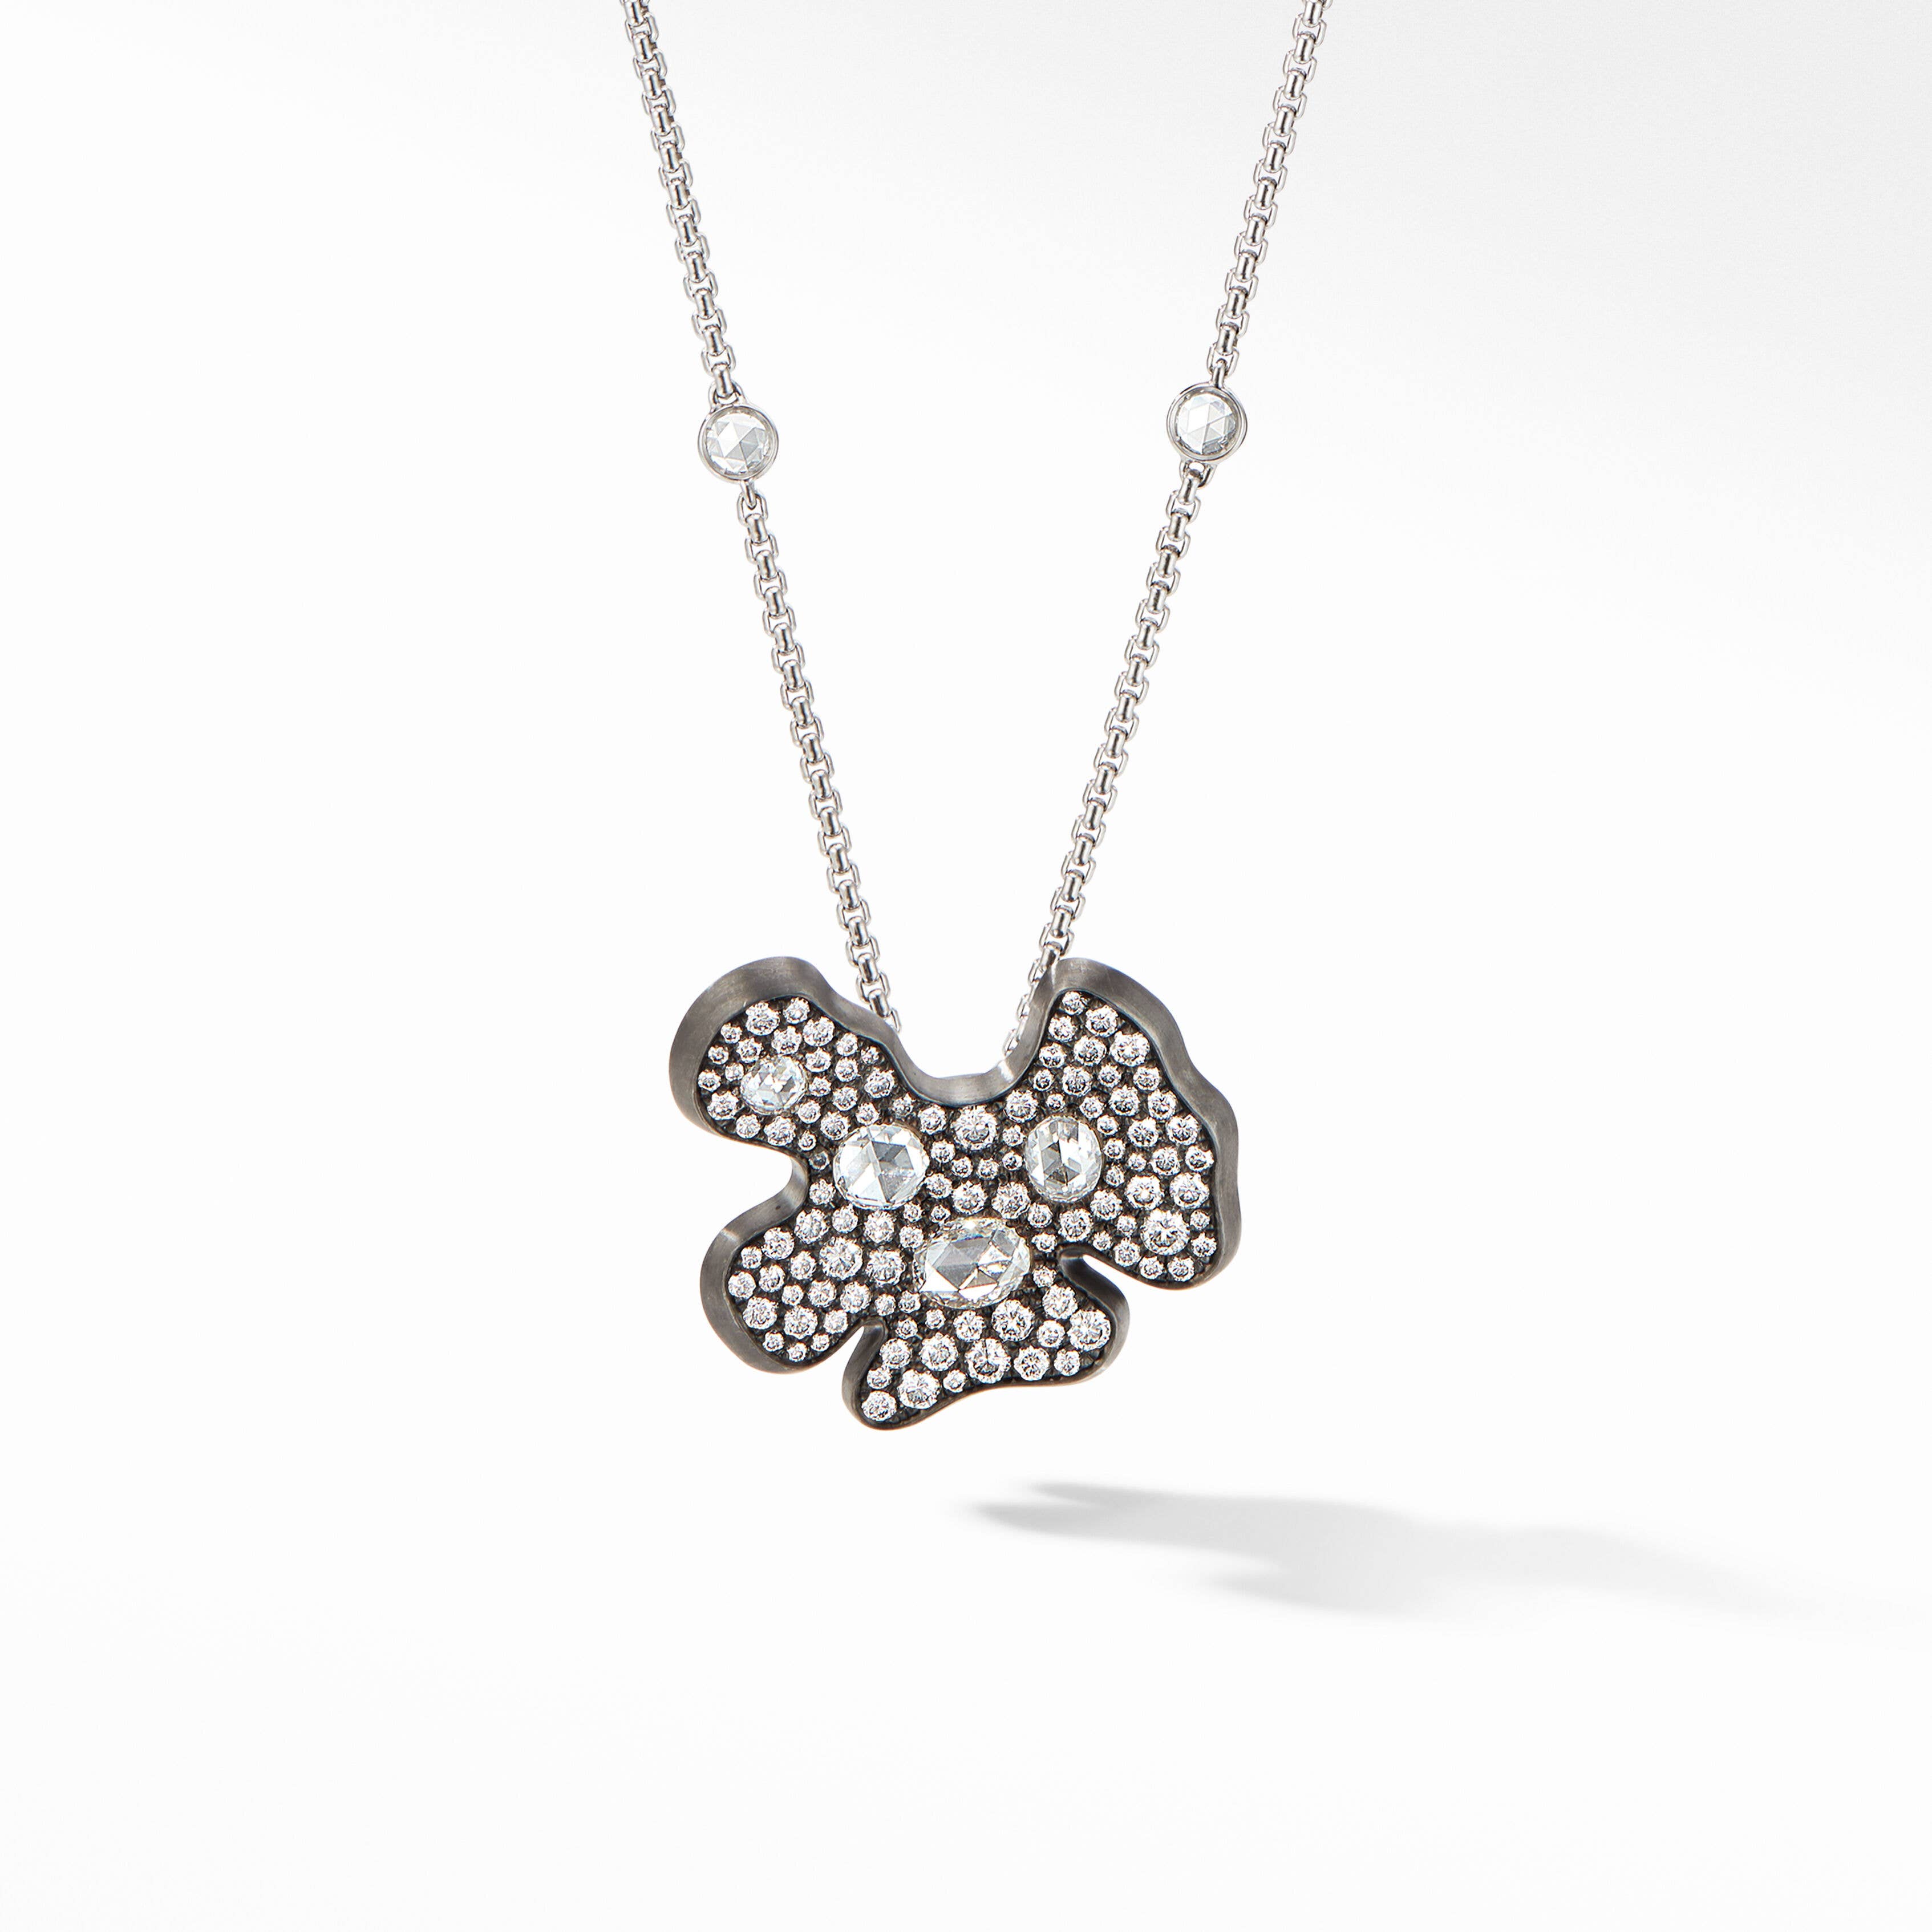 Night Petals Pendant with White Gold and Diamonds